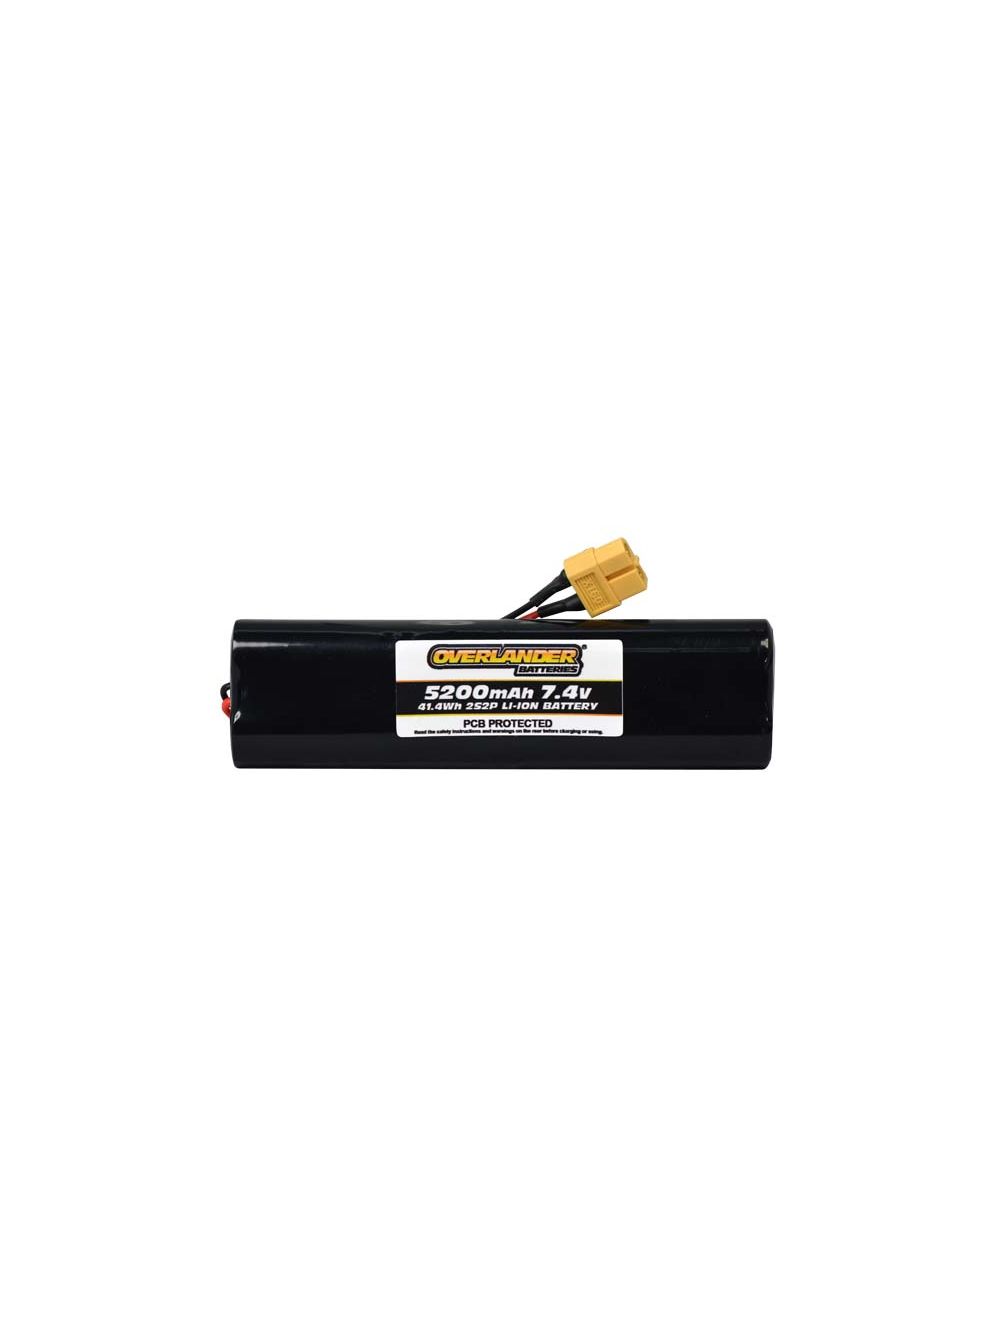 Overlander 5200mAh 2S2P 7.4V Li-Ion Rechargeable Battery with PCB Config 9 3307